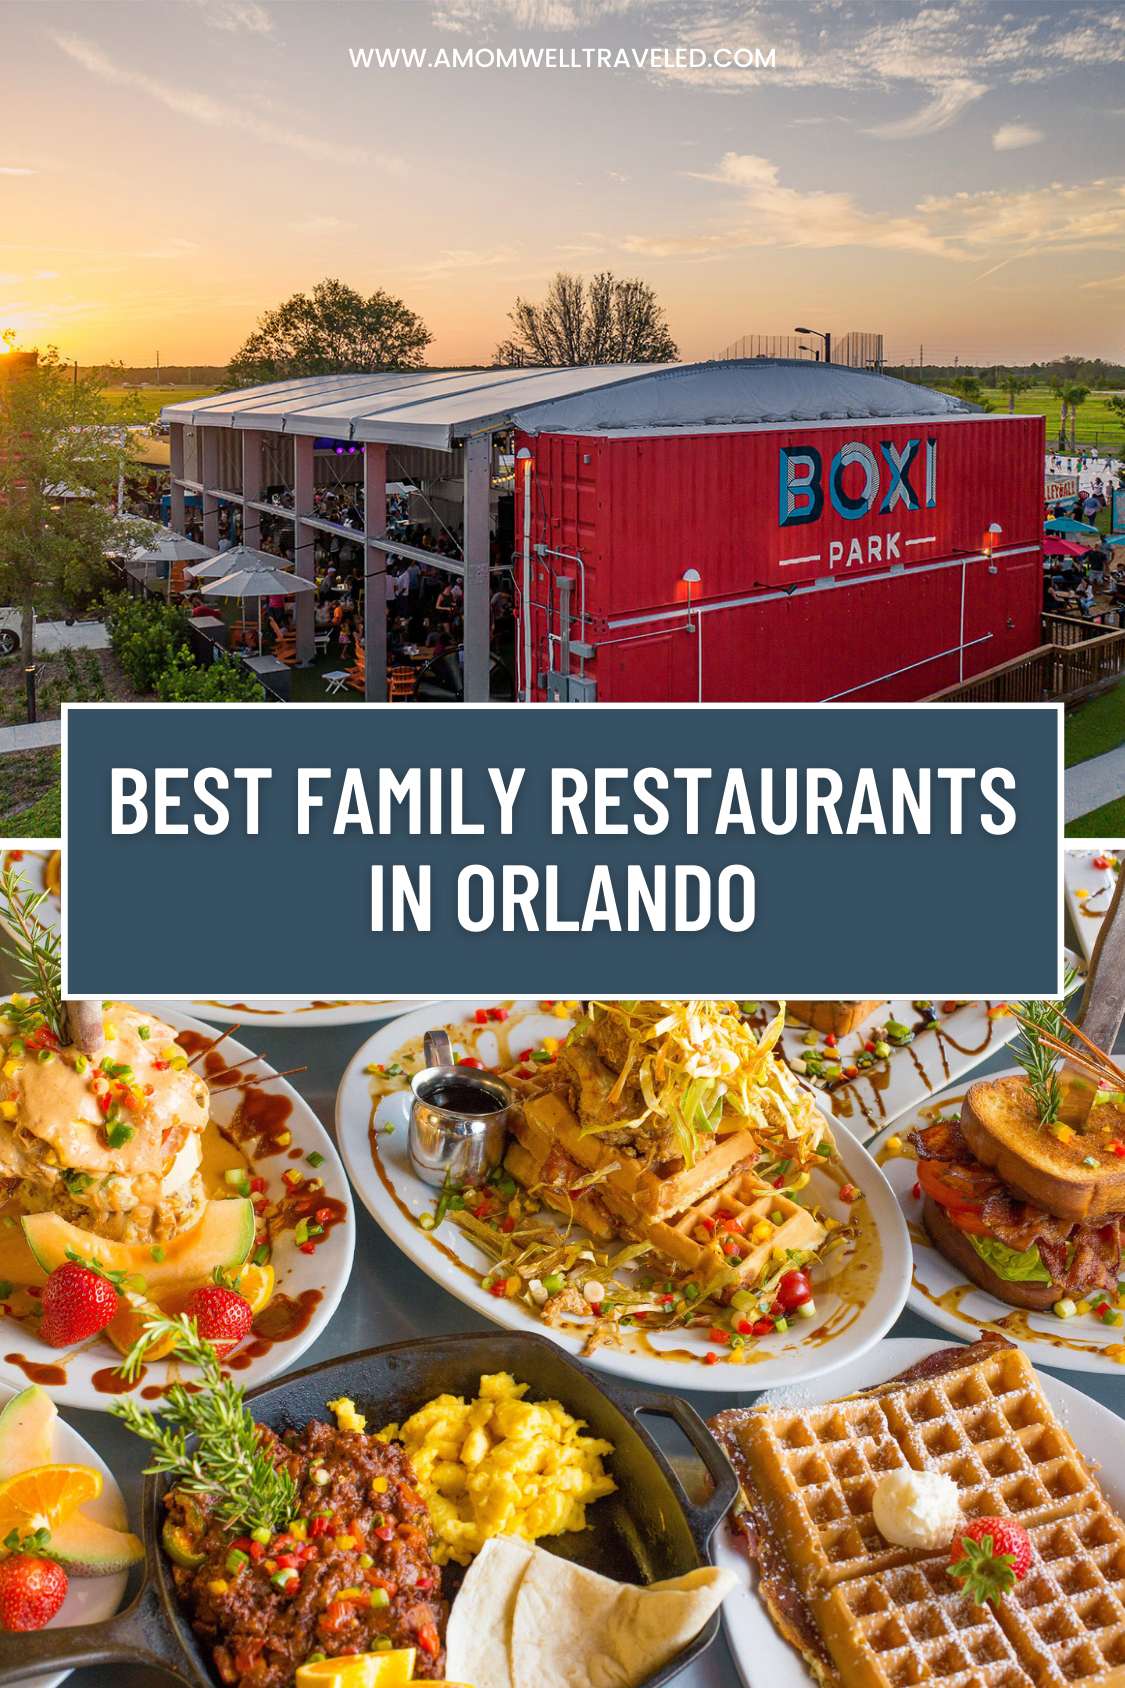 Best places to eat in Orlando for families